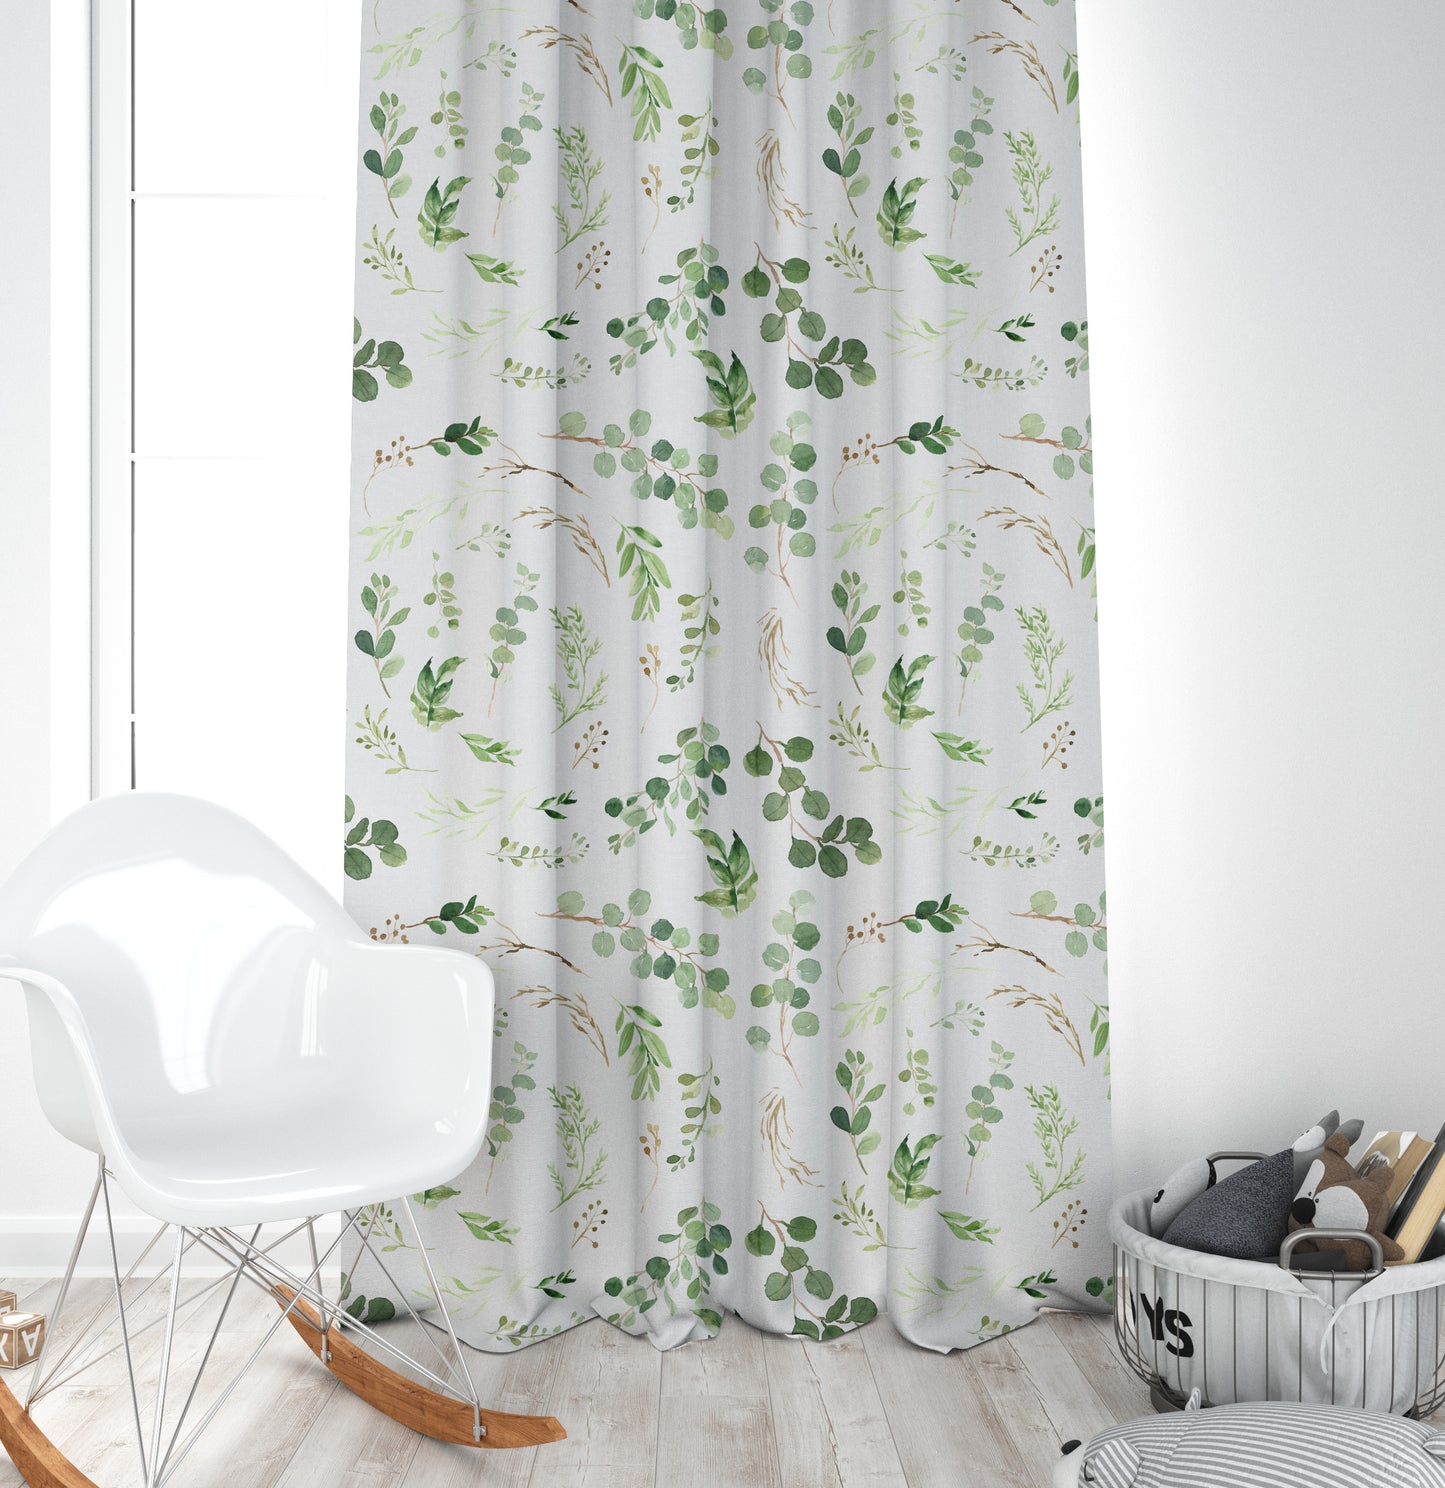 Greenery Blackout Curtains